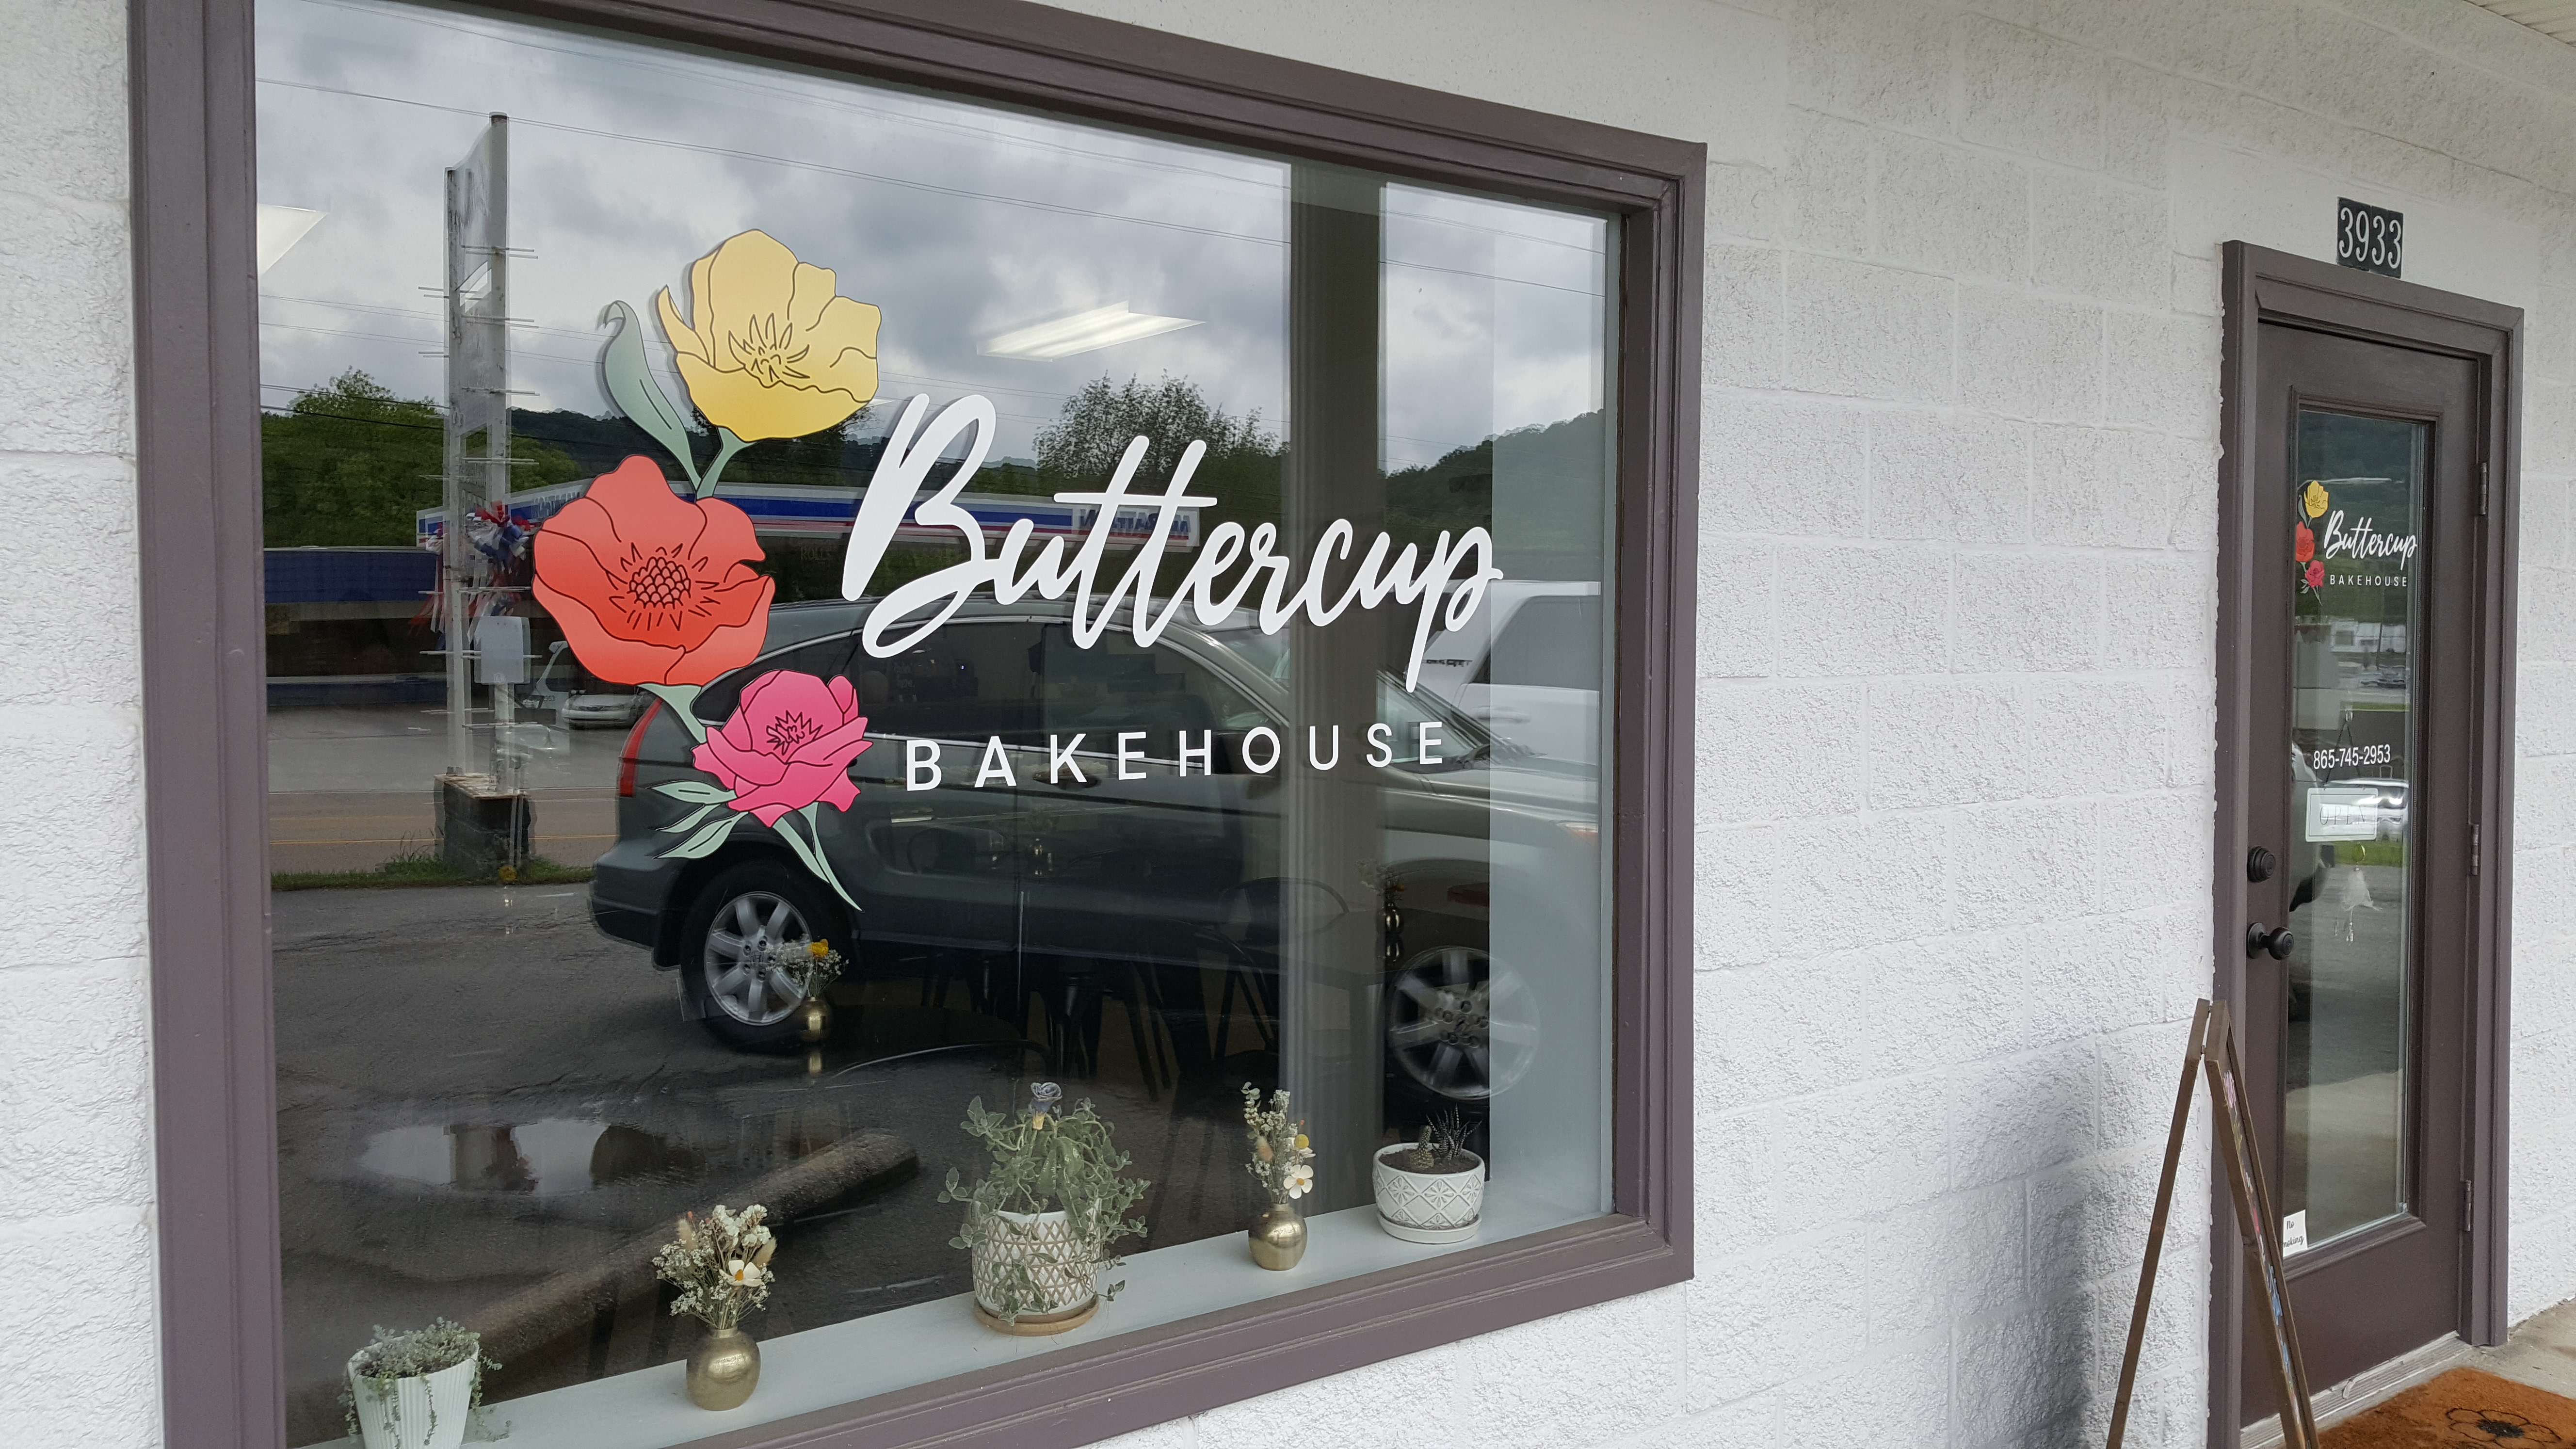 Buttercup Bakehouse offers breakfast and sweet treats